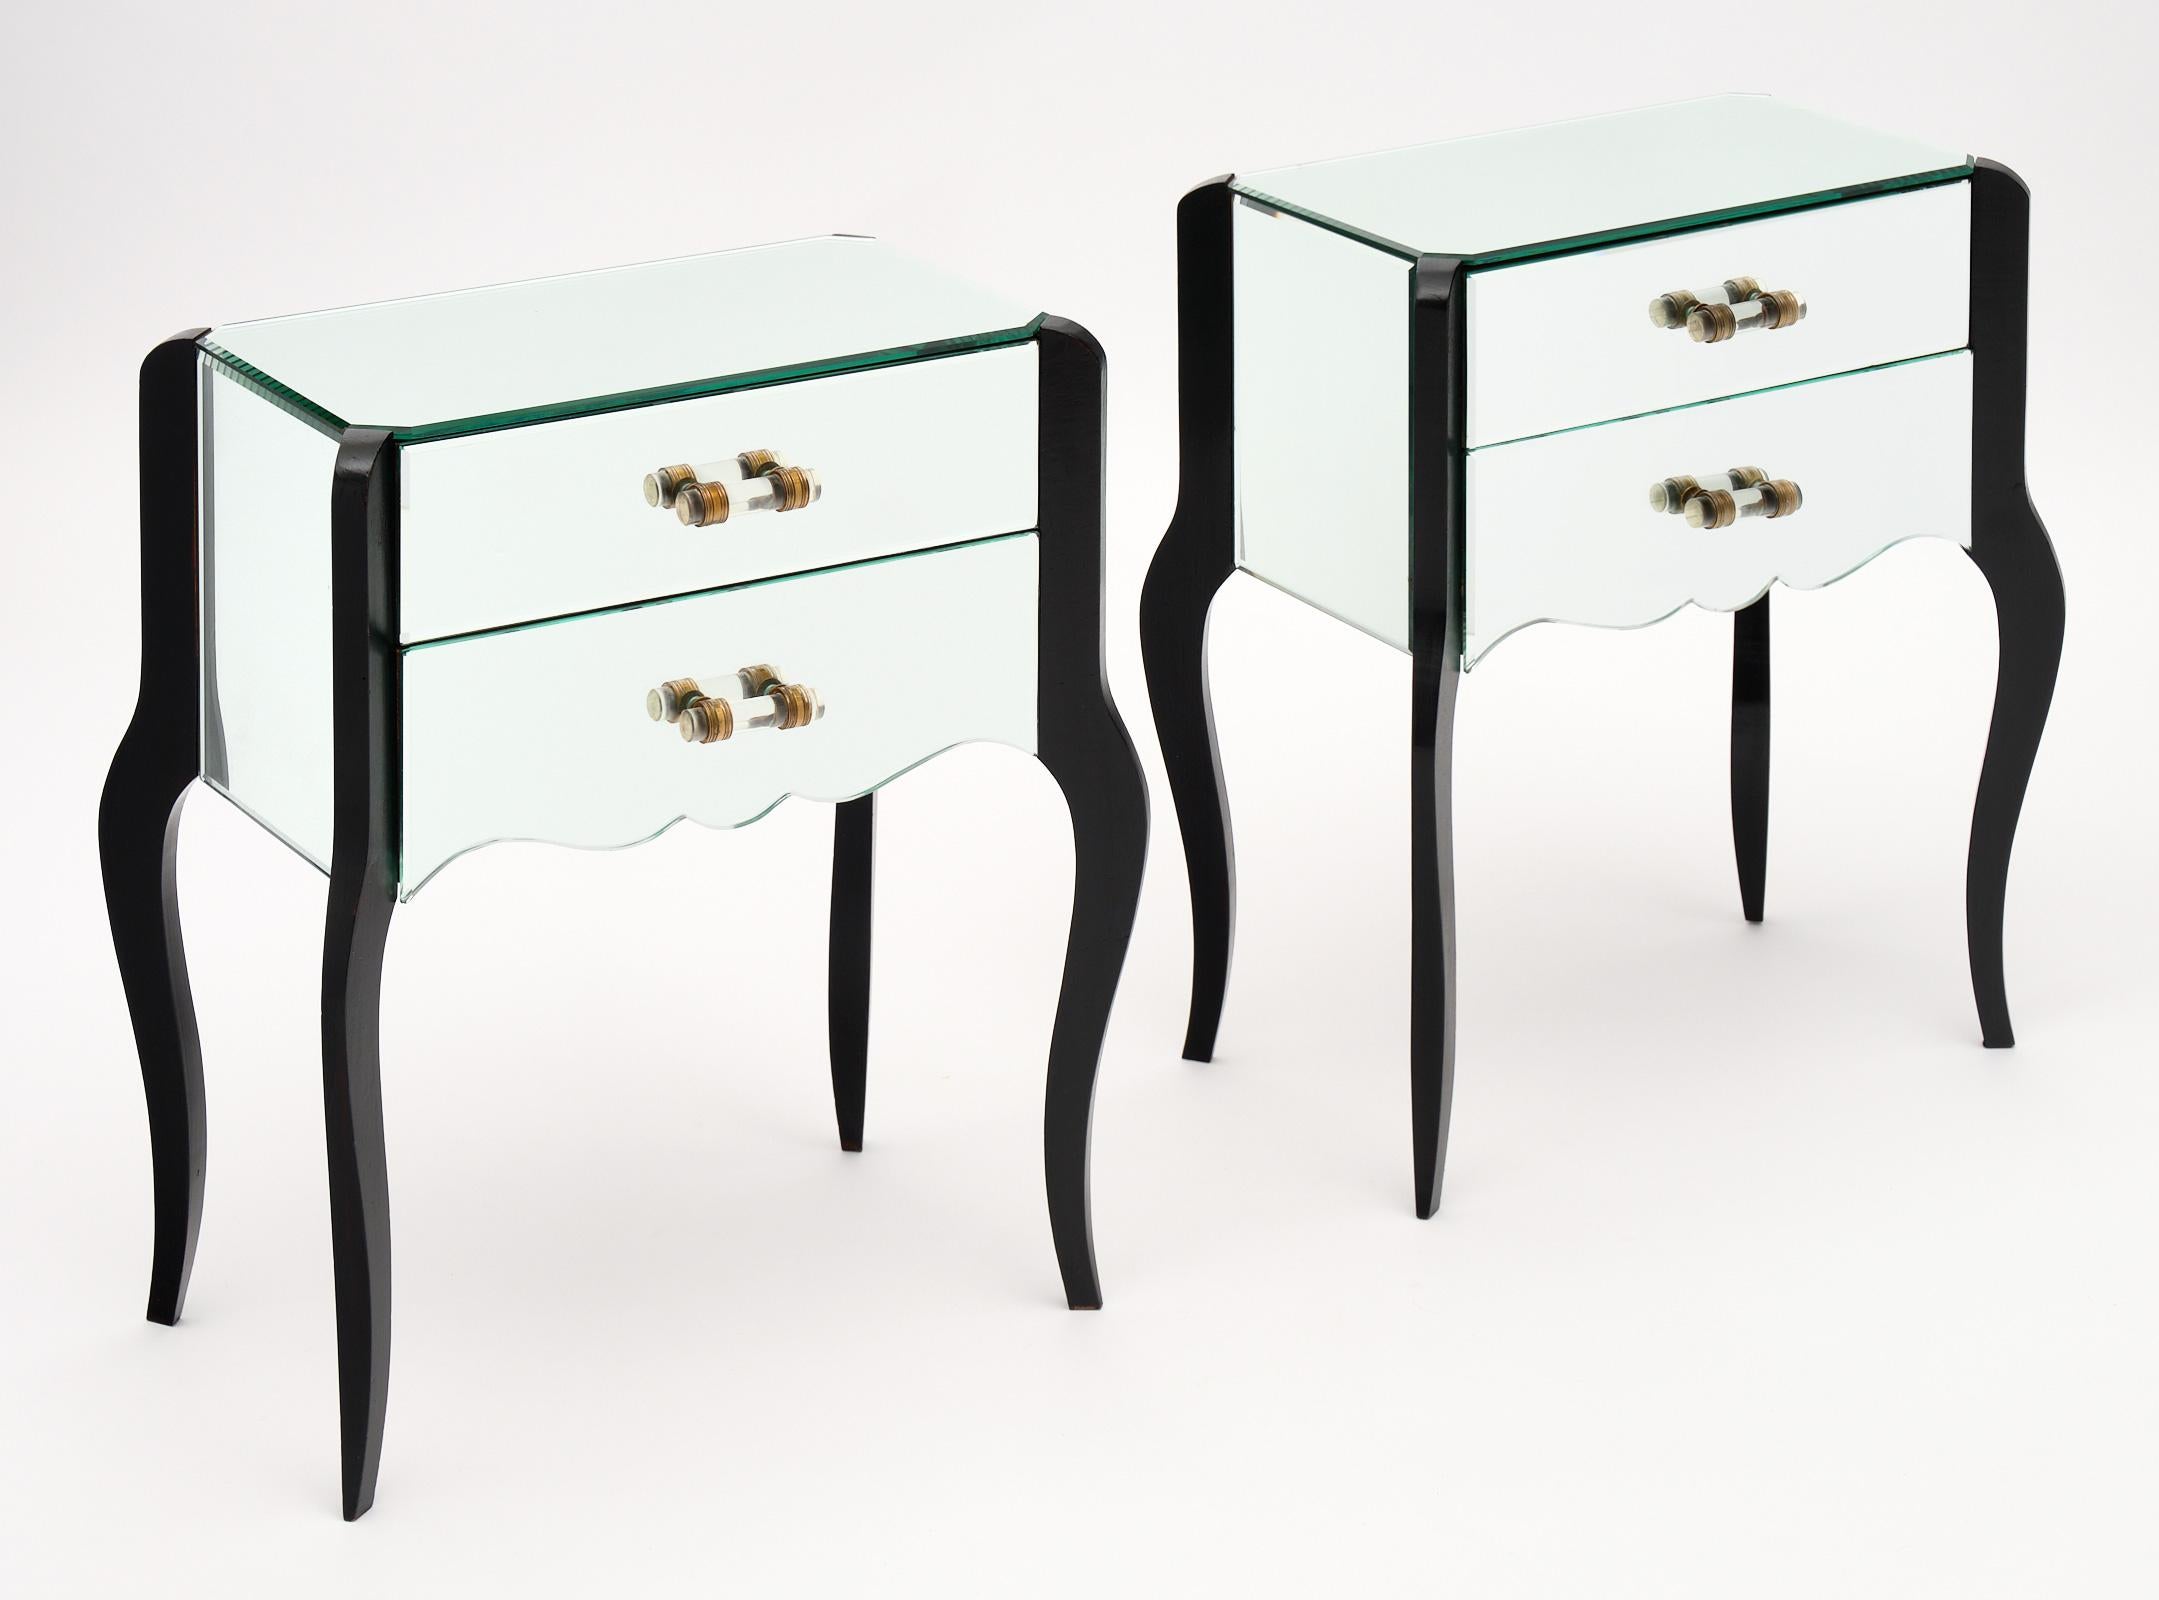 French Art Deco period mirrored side tables with wooden, ebonized cabriole legs. We love the unique, original pulls and beautiful condition of this pair.